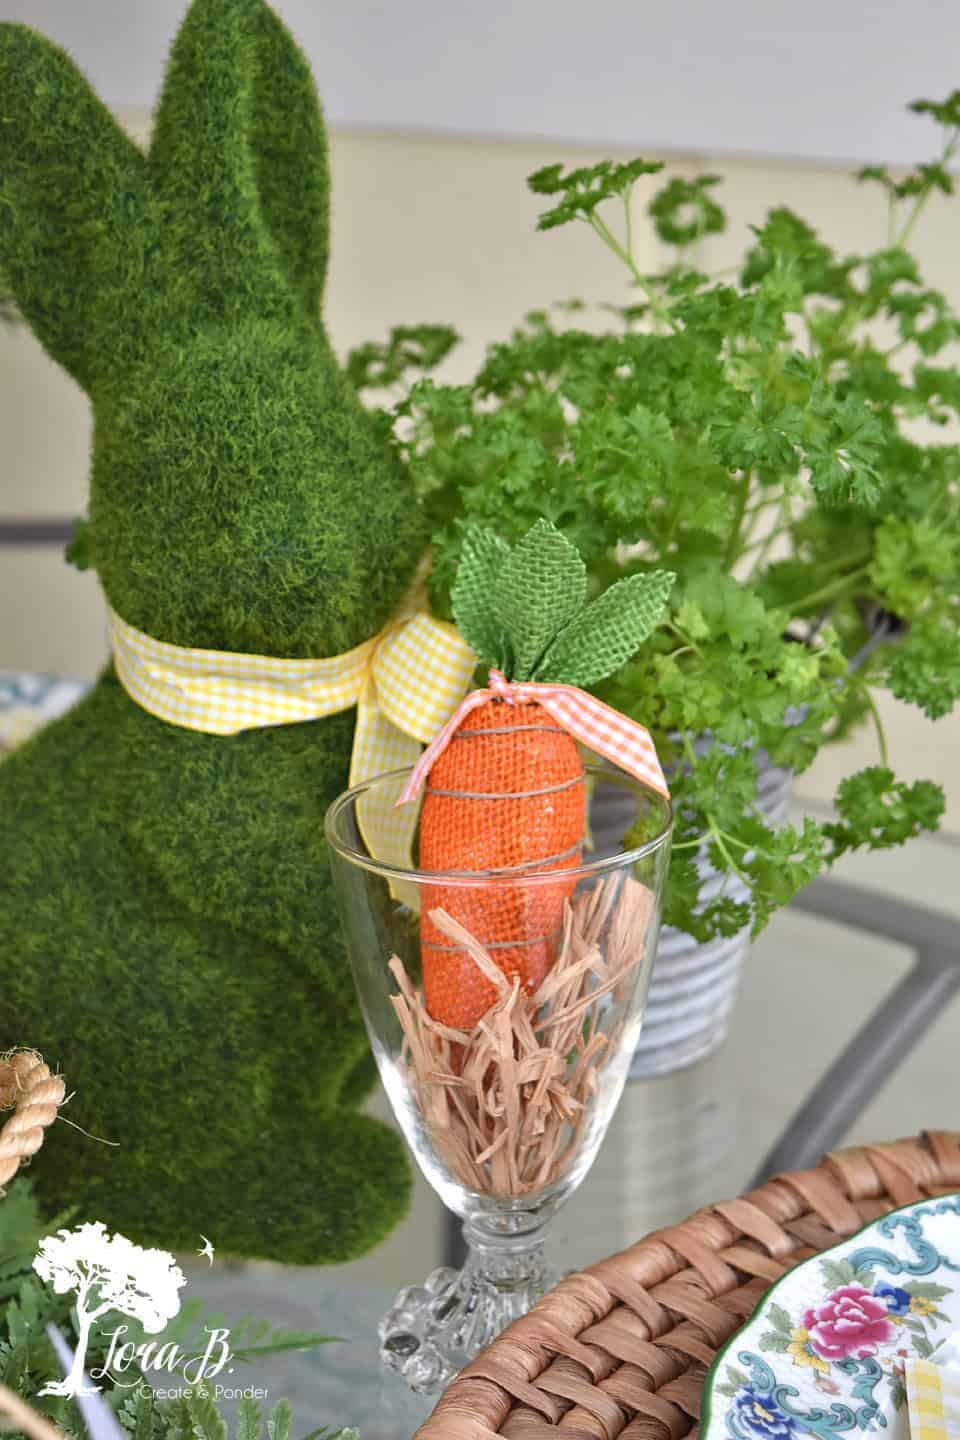 Pretty Table Setting for Spring on the Porch